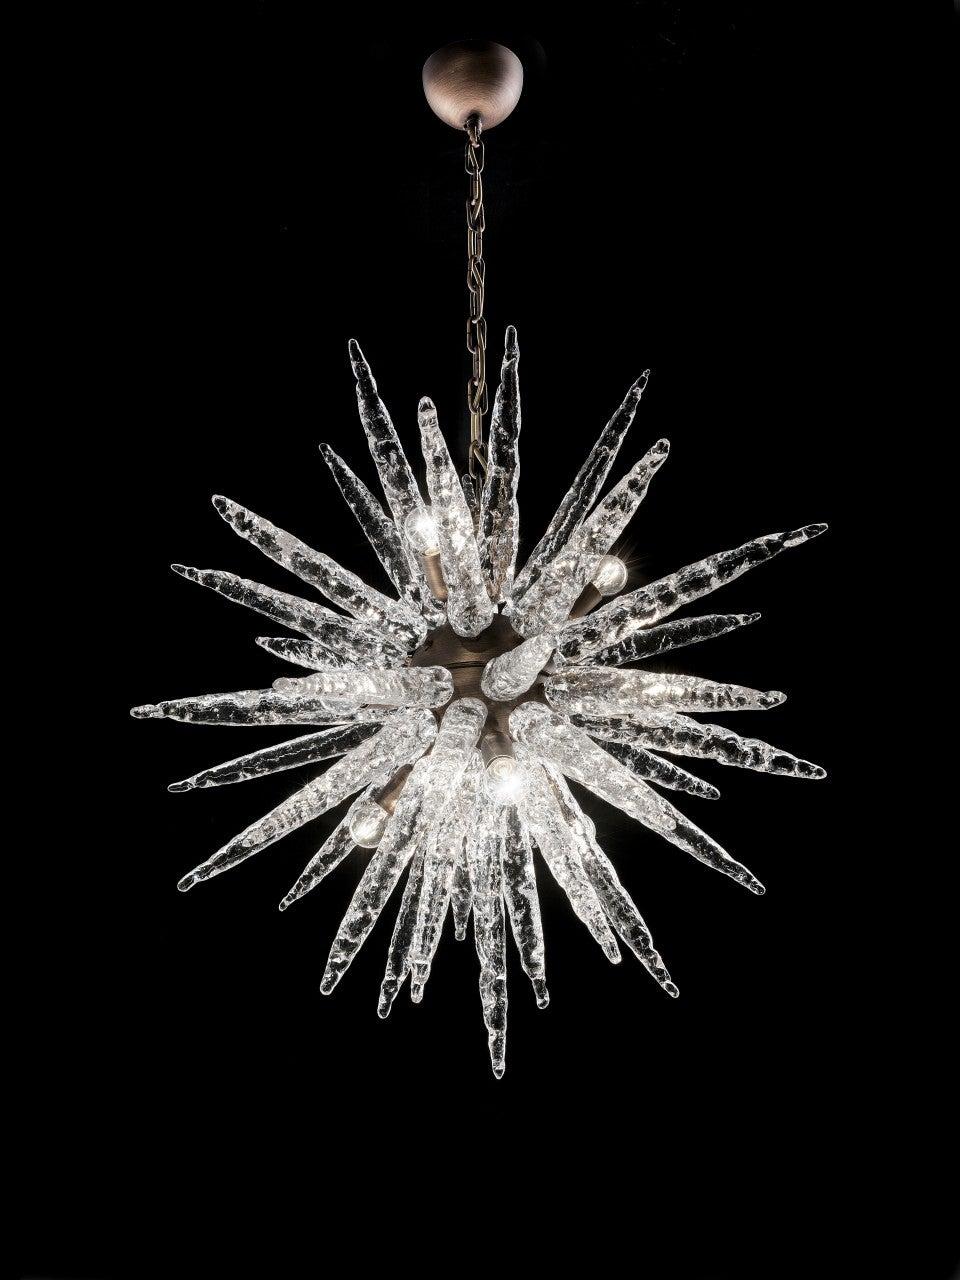 Italian Sputnik chandelier with clear Murano icicle shaped glasses, mounted on bronze metal finish frame / Designed by Fabio Bergomi for Fabio Ltd / Made in Italy
9 lights / E12 or E14 type / max 40W each
Measures: Height 30 inches plus chain and